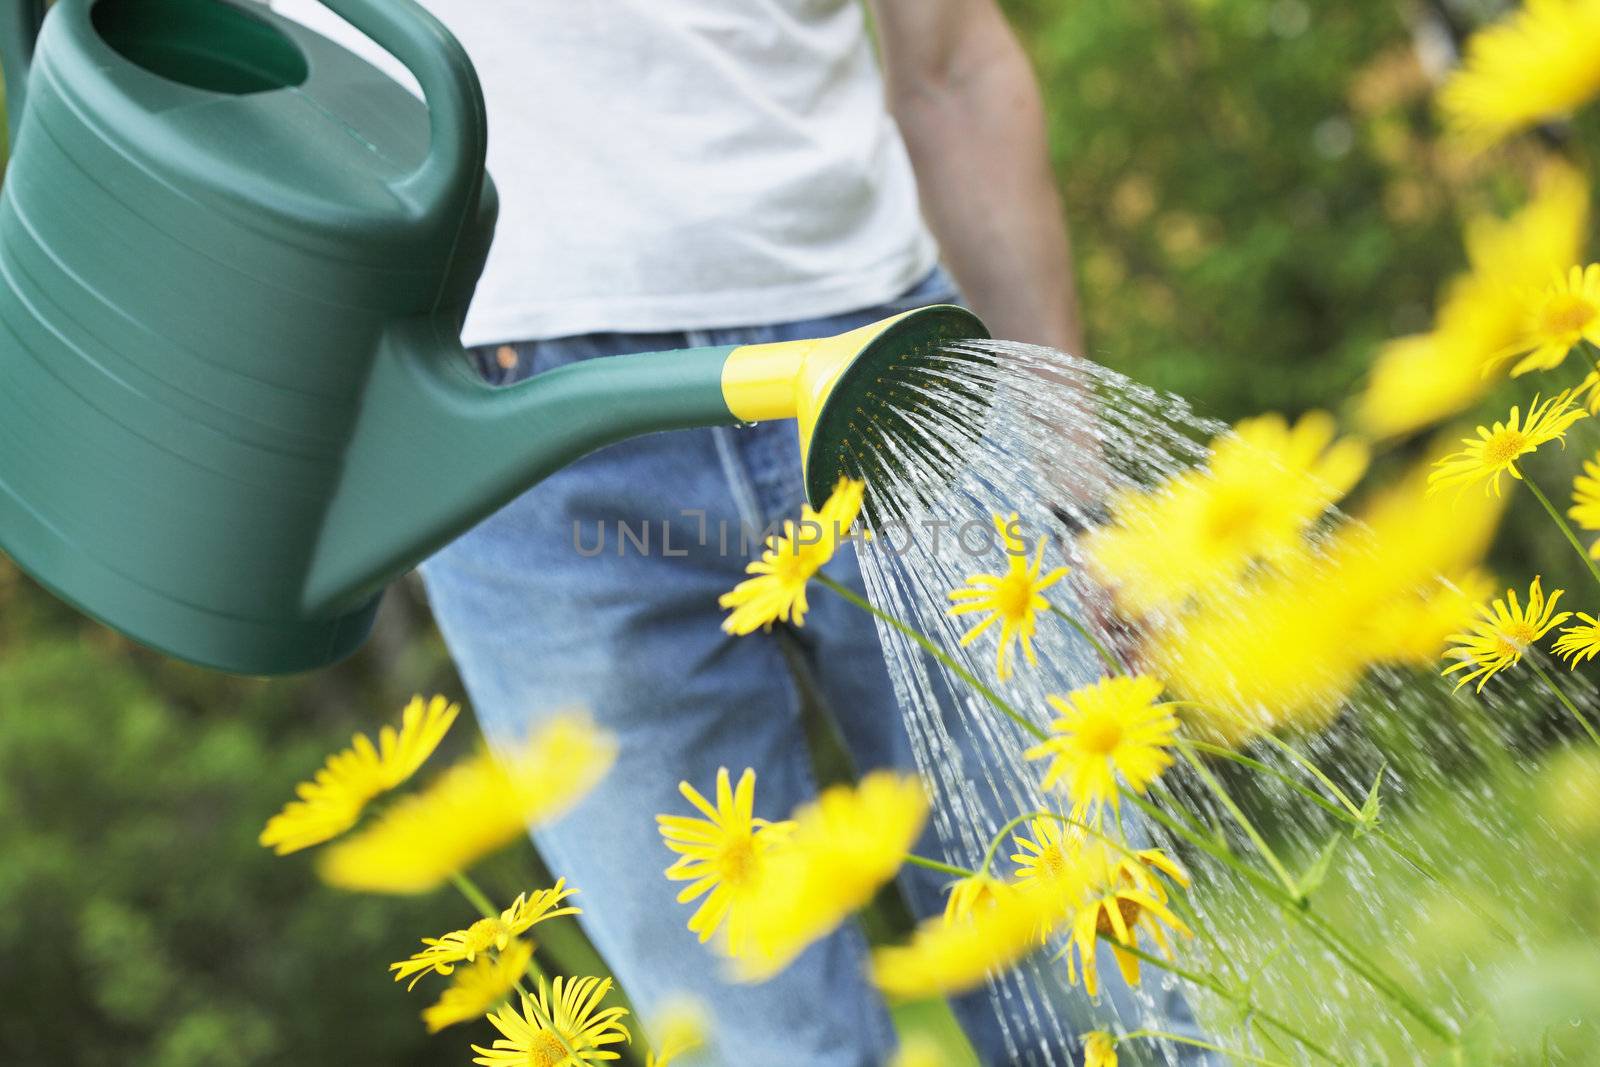 Watering yellow summer flowers with a green watering can.